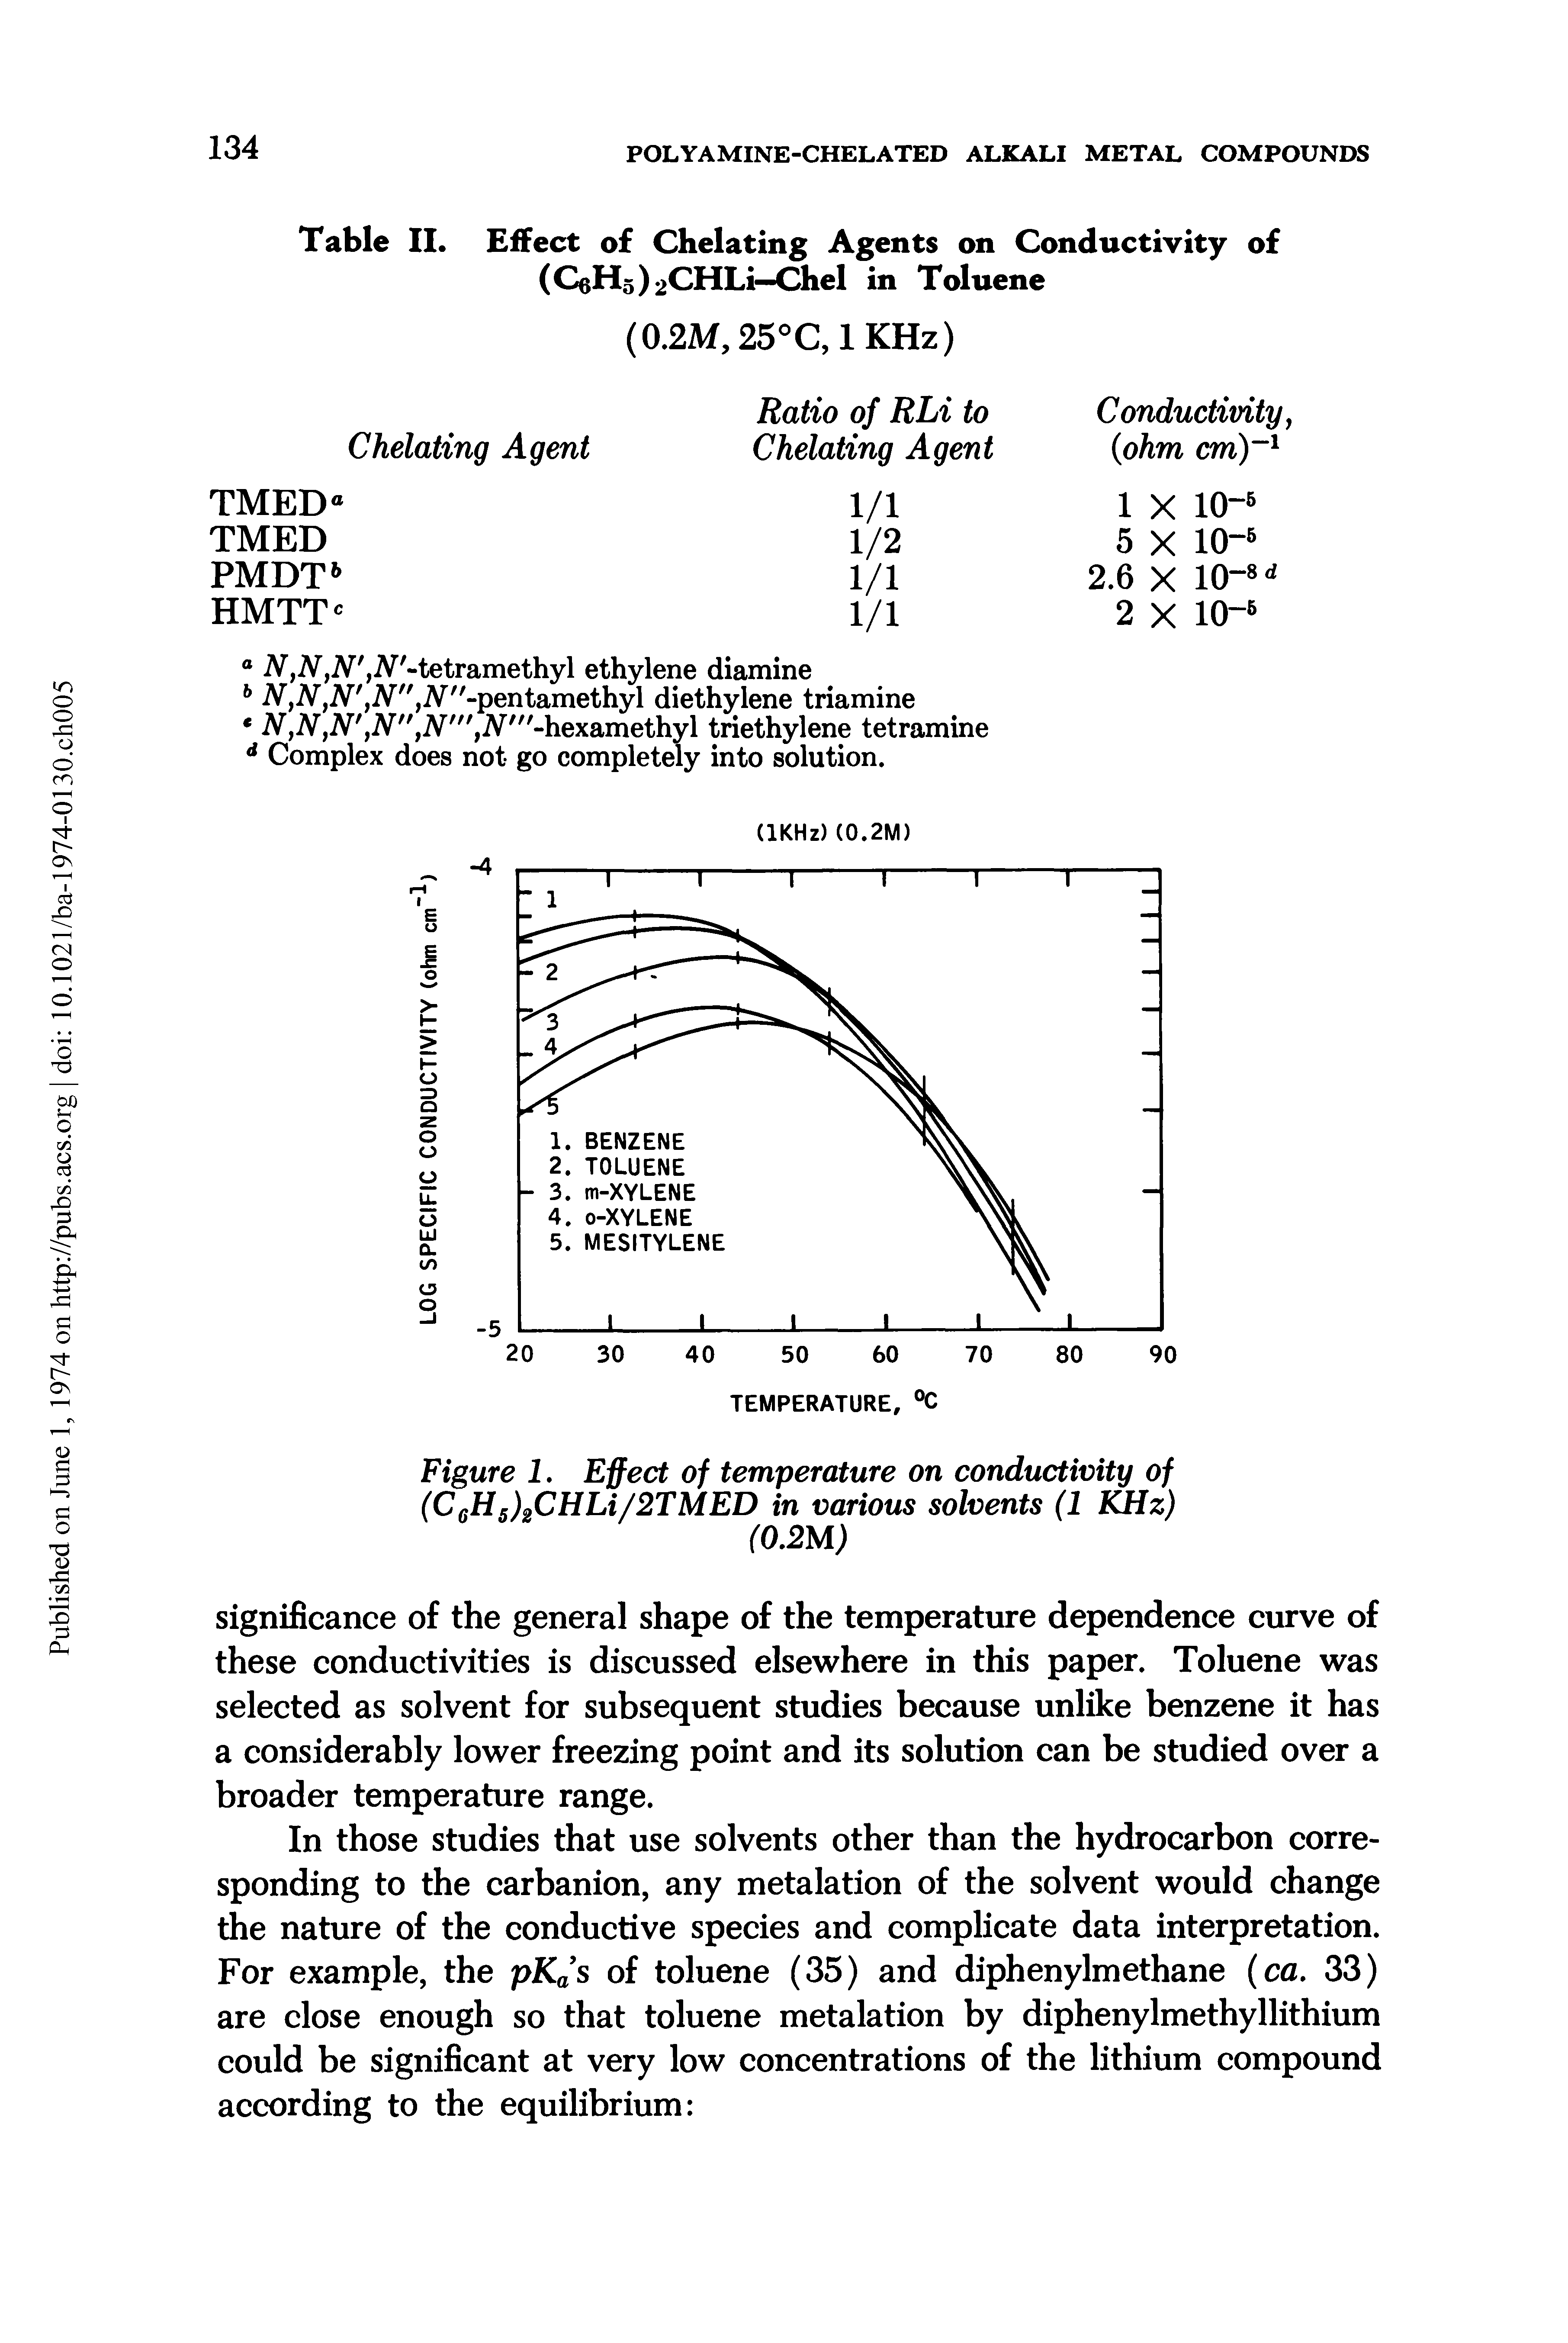 Figure 1. Effect of temperature on conductivity of (C6H5)2CHLi/2TMED in various solvents (1 KHz)...